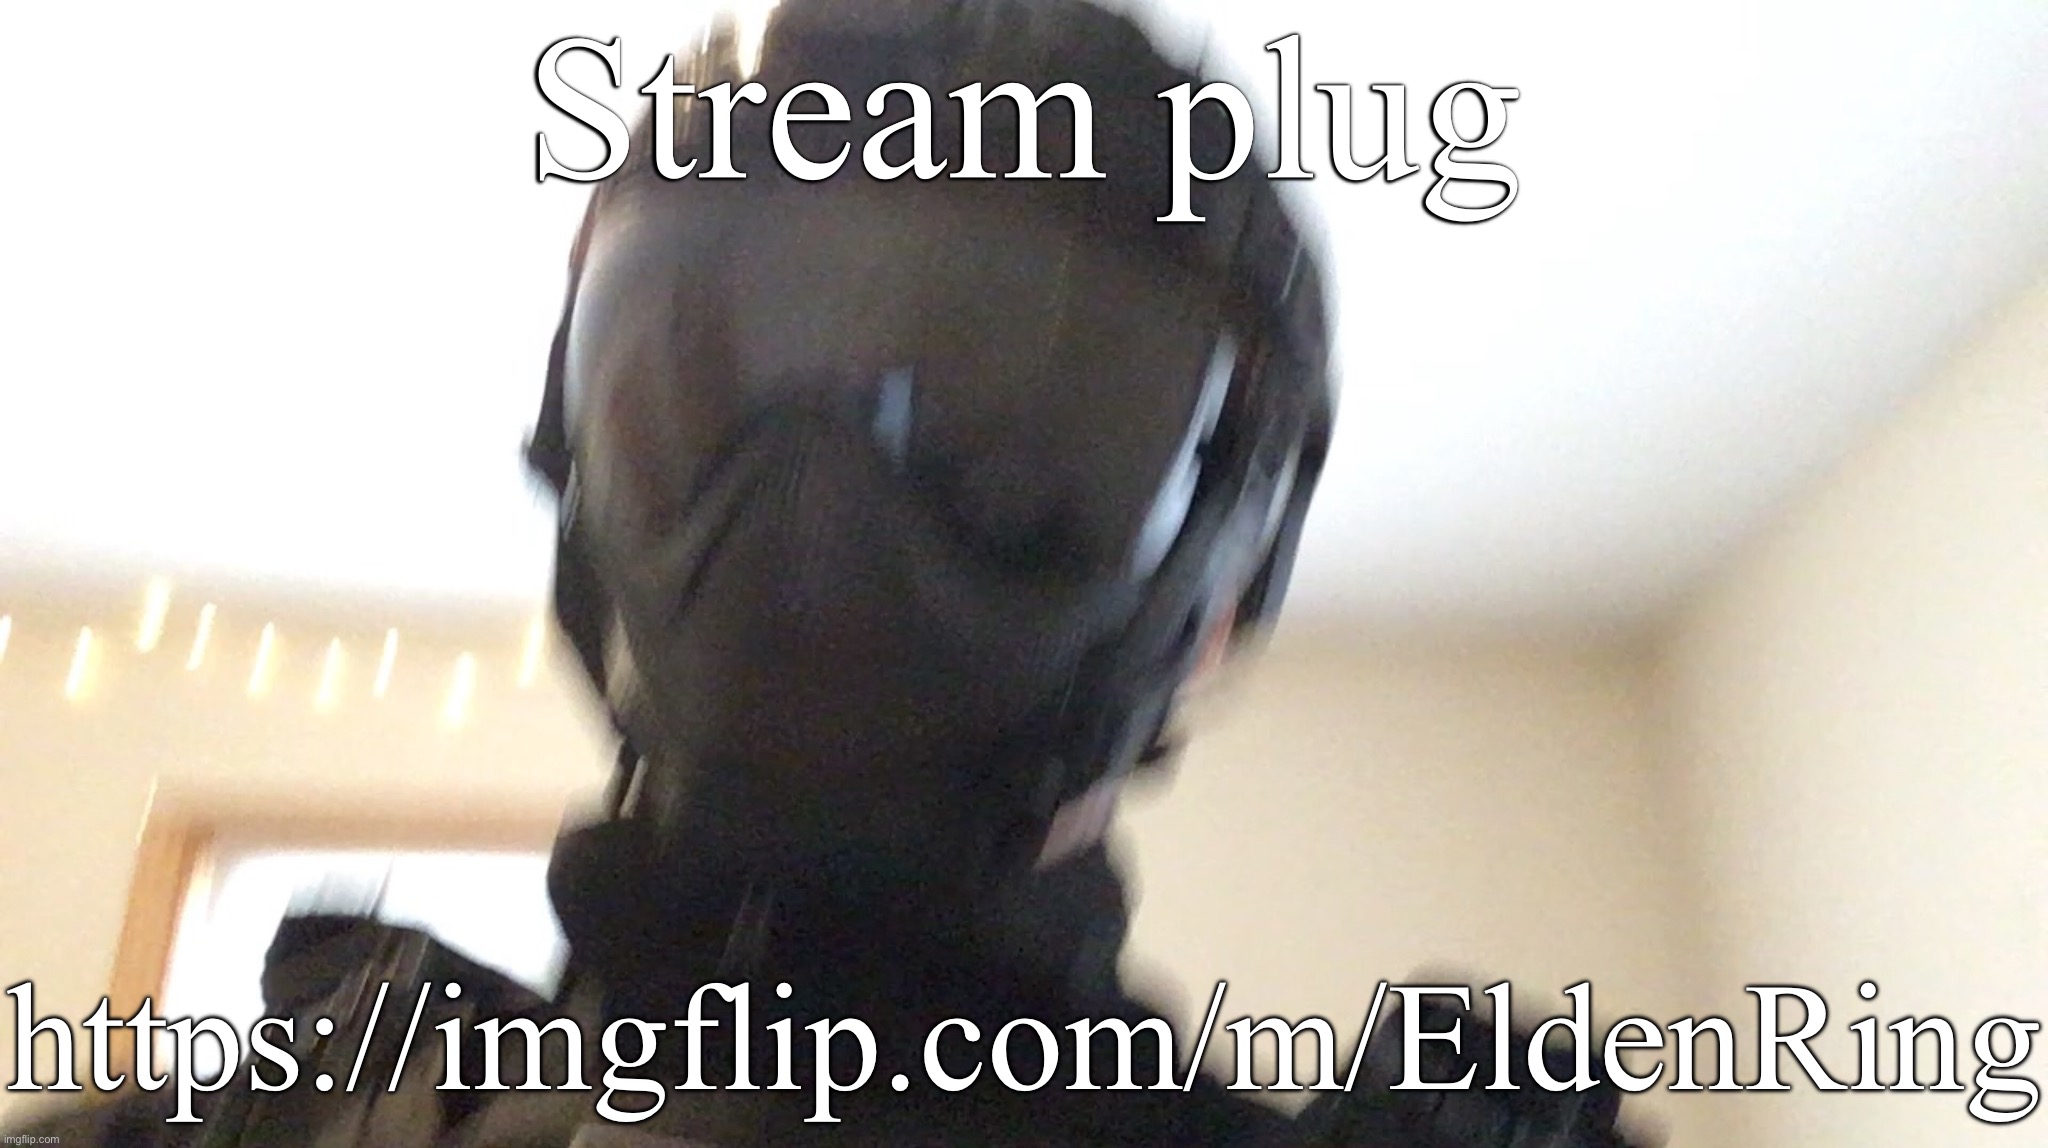 Stream plug; https://imgflip.com/m/EldenRing | image tagged in face of man | made w/ Imgflip meme maker